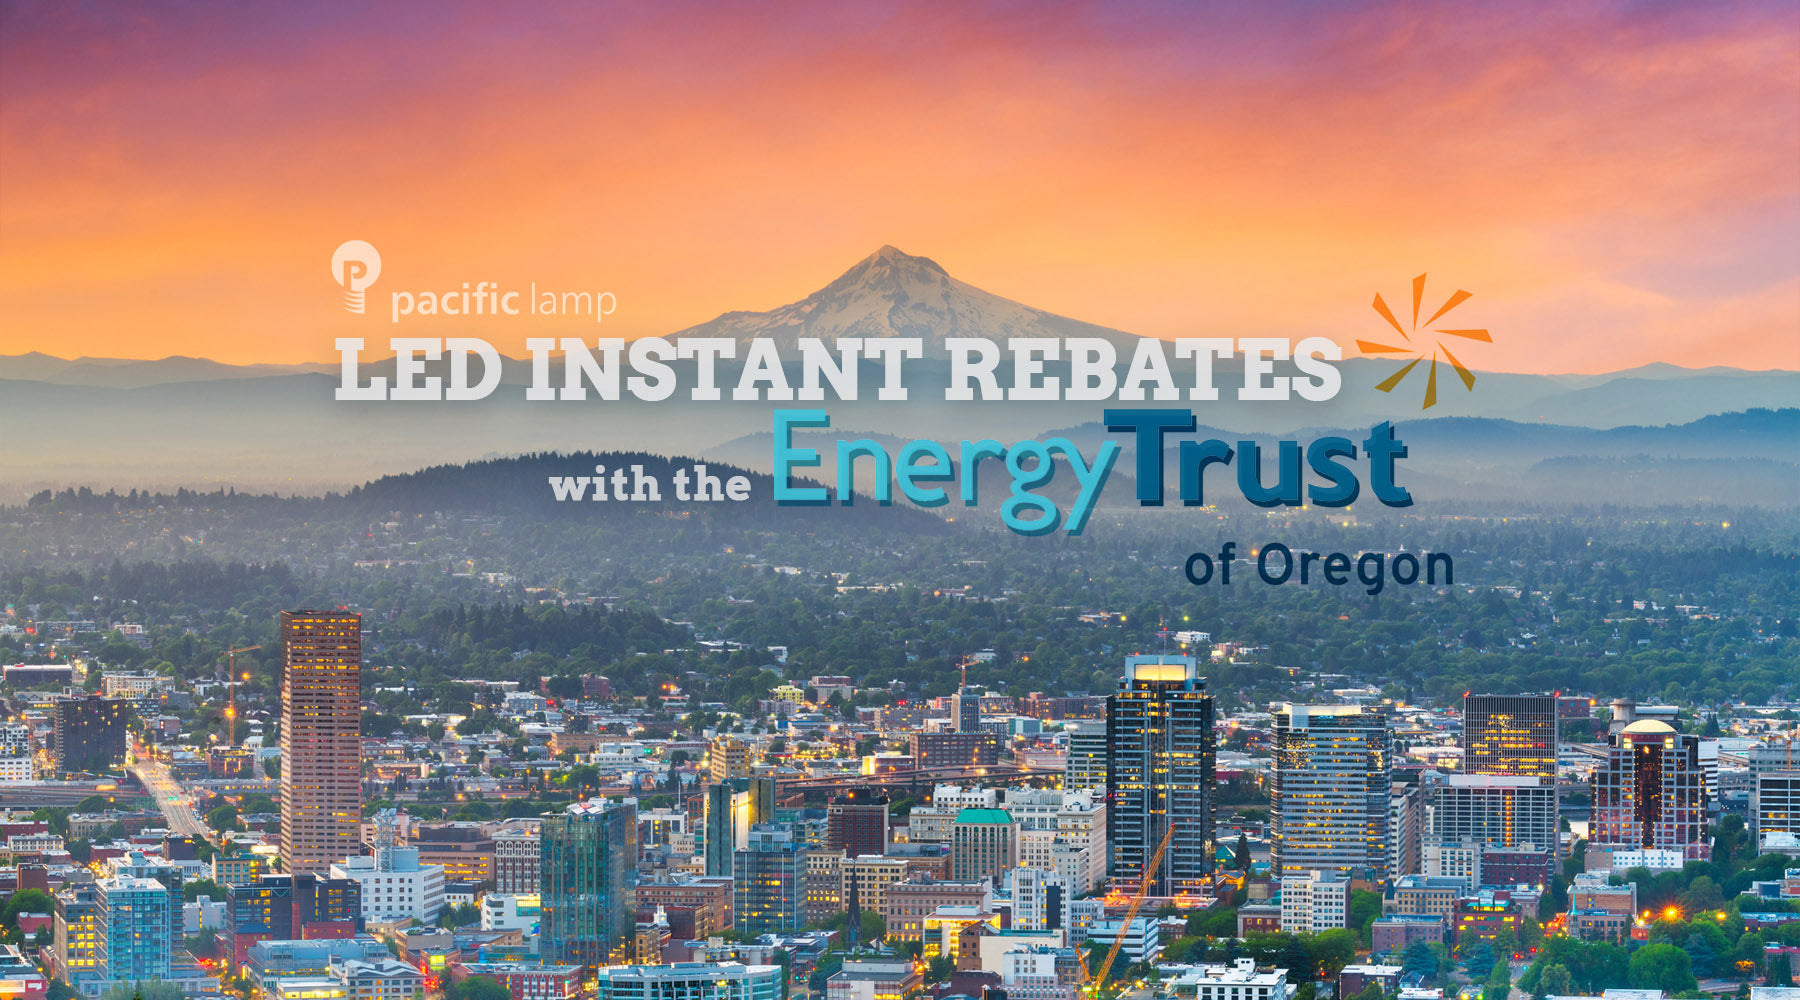 Pacific Lamp LED Instant Rebates with the Energy Trust of Oregon